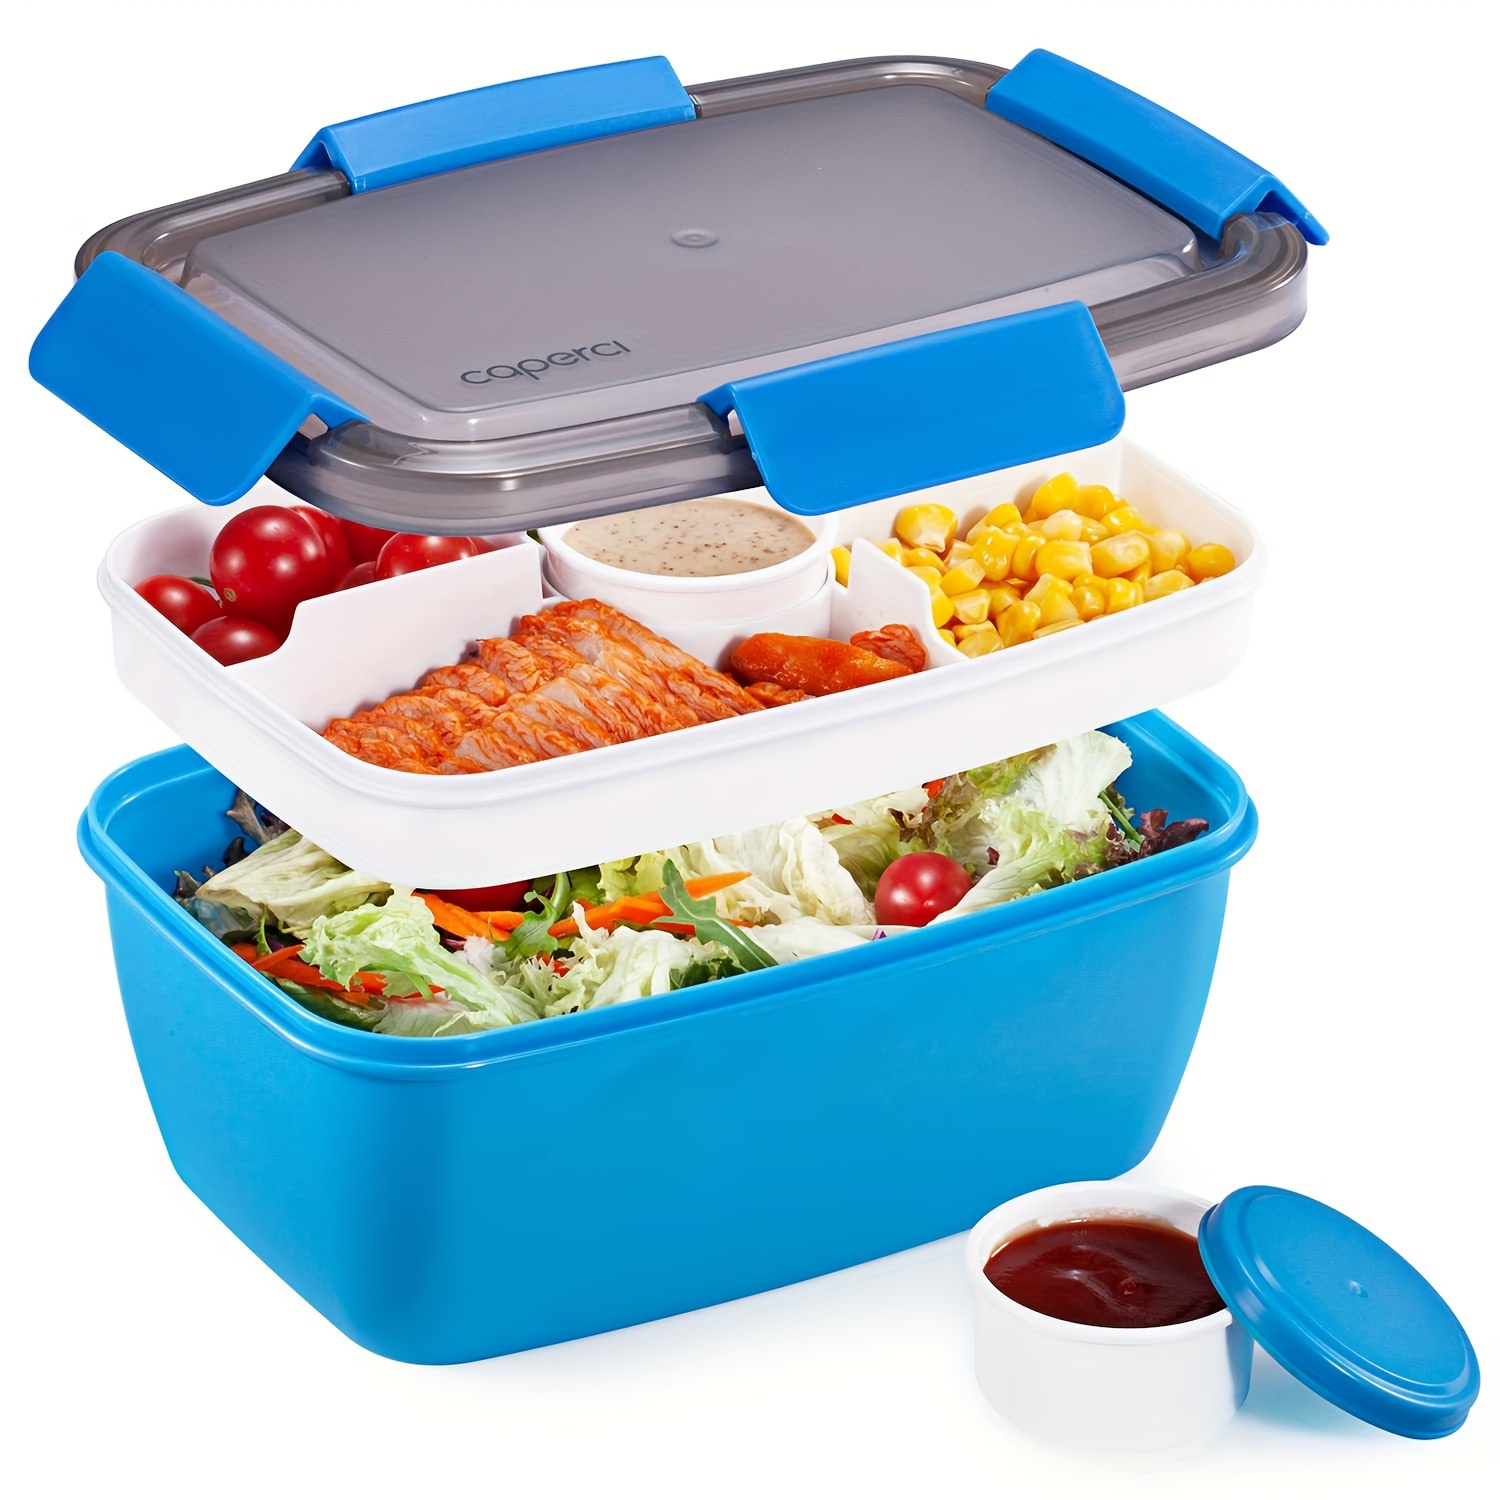 

Bento Lunch Box With 5-compartment Tray And 2 Sauce Cups, Large 68 Oz Salad Bowl Container, Stackable, Microwave & Dishwasher Safe, Bpa-free Plastic, Leak-proof, Manual, No Electricity Needed